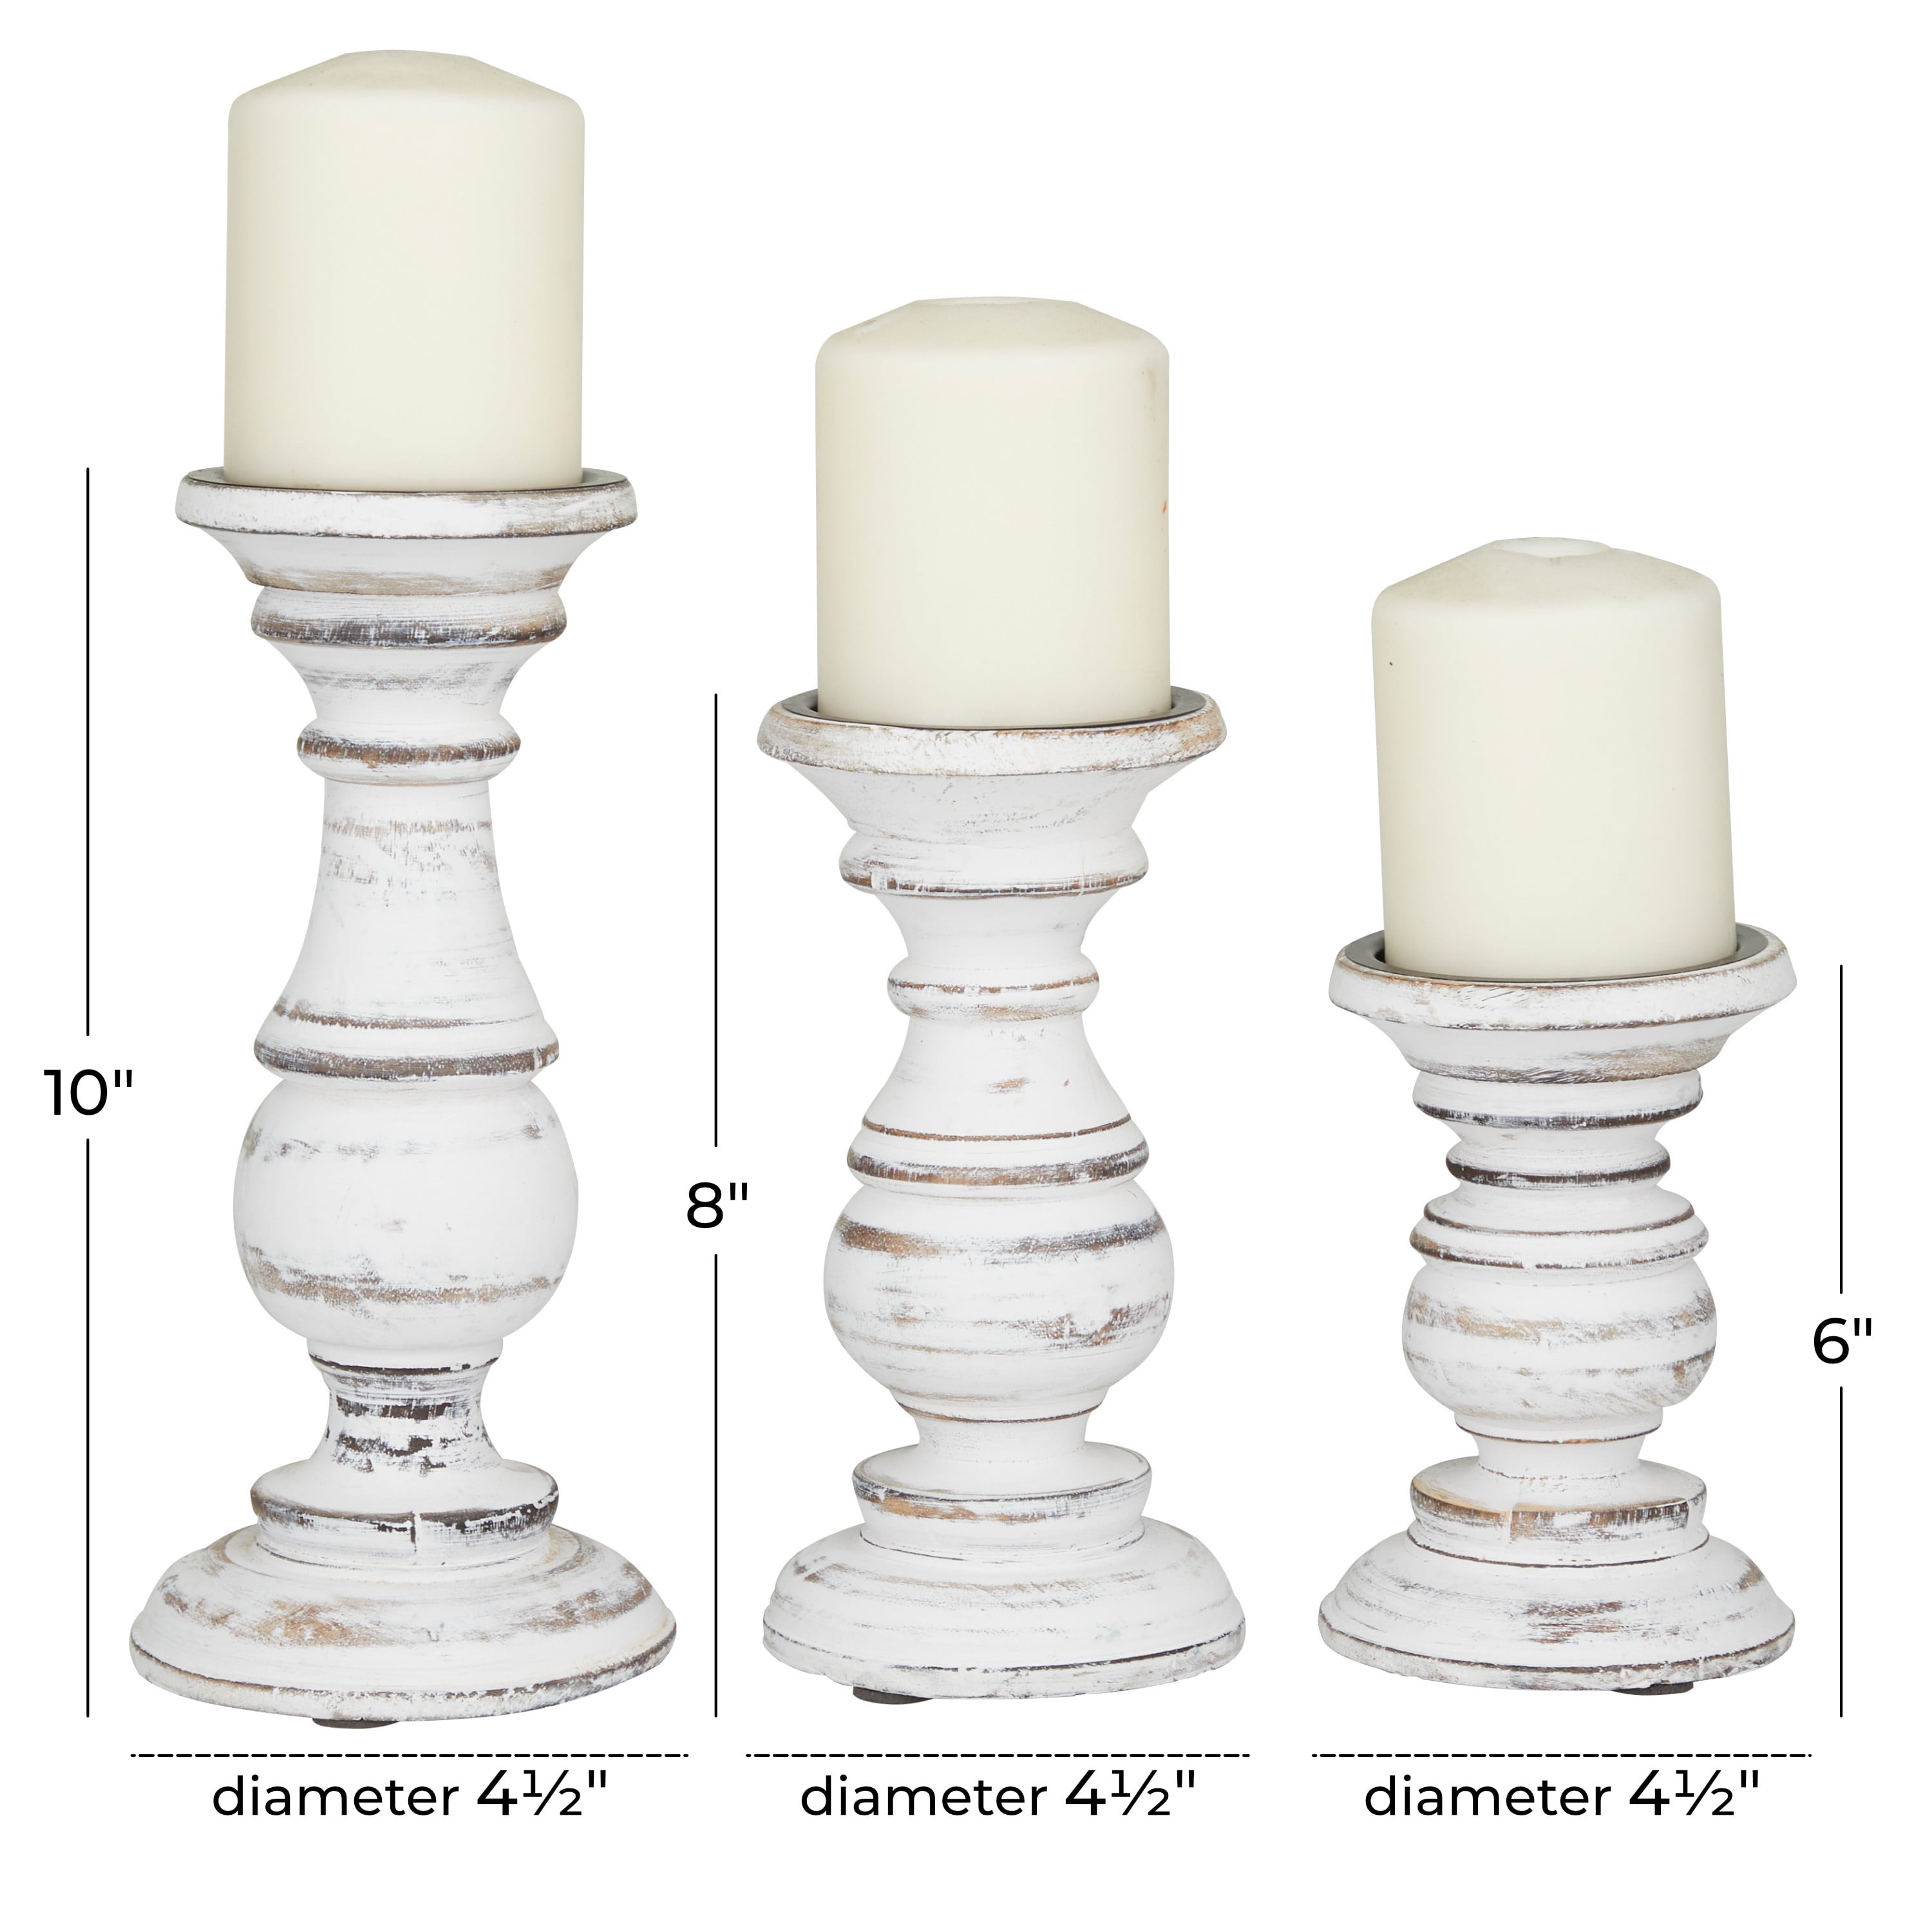 Glass Candle Traditional 10" Long X 3/4" Diameter Clear Packet of 3 